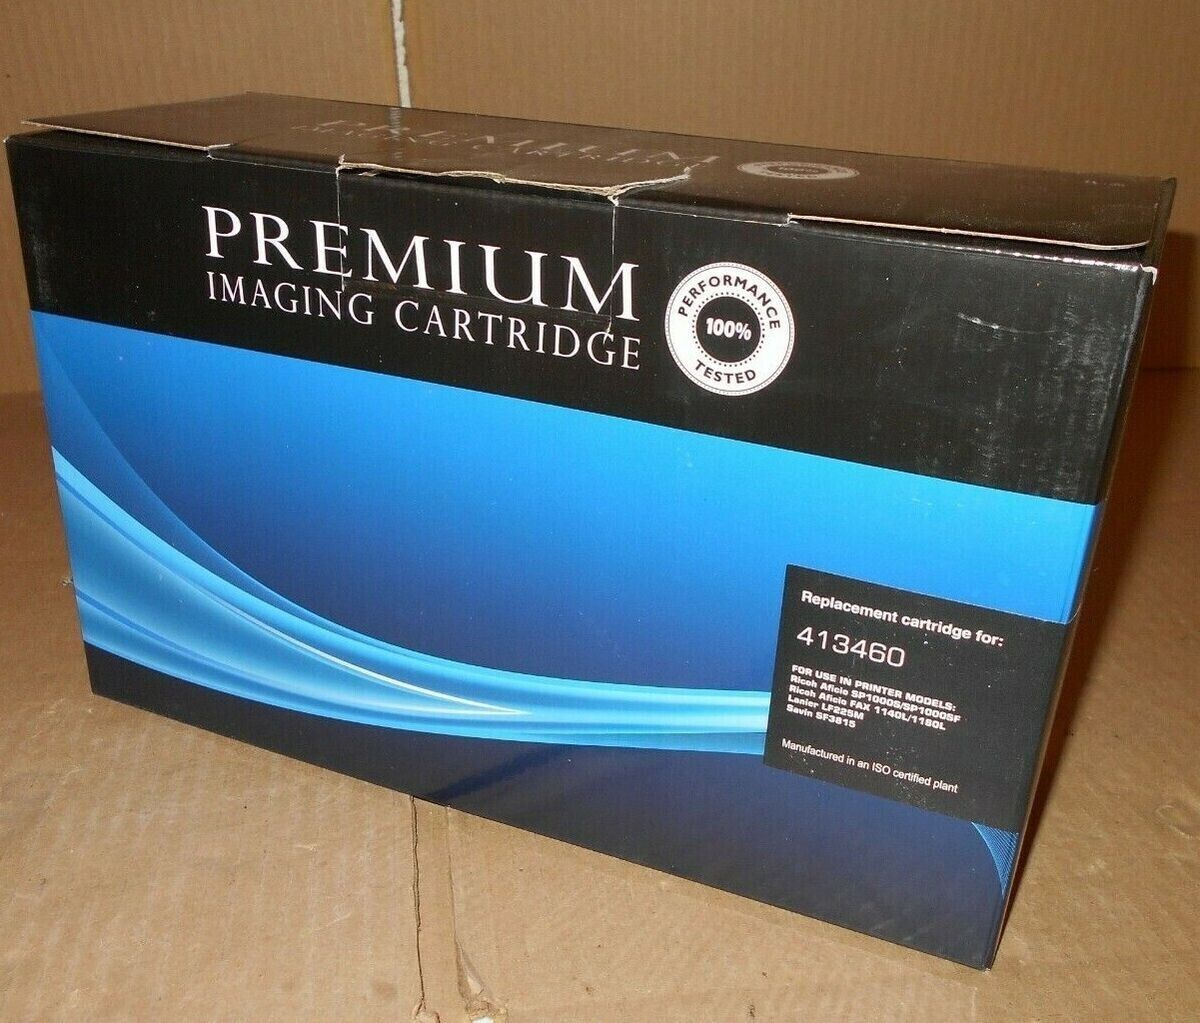 Premium Imaging Cartridge, Replacement Cartridge for T650H21A, T650H11A. Lexmark